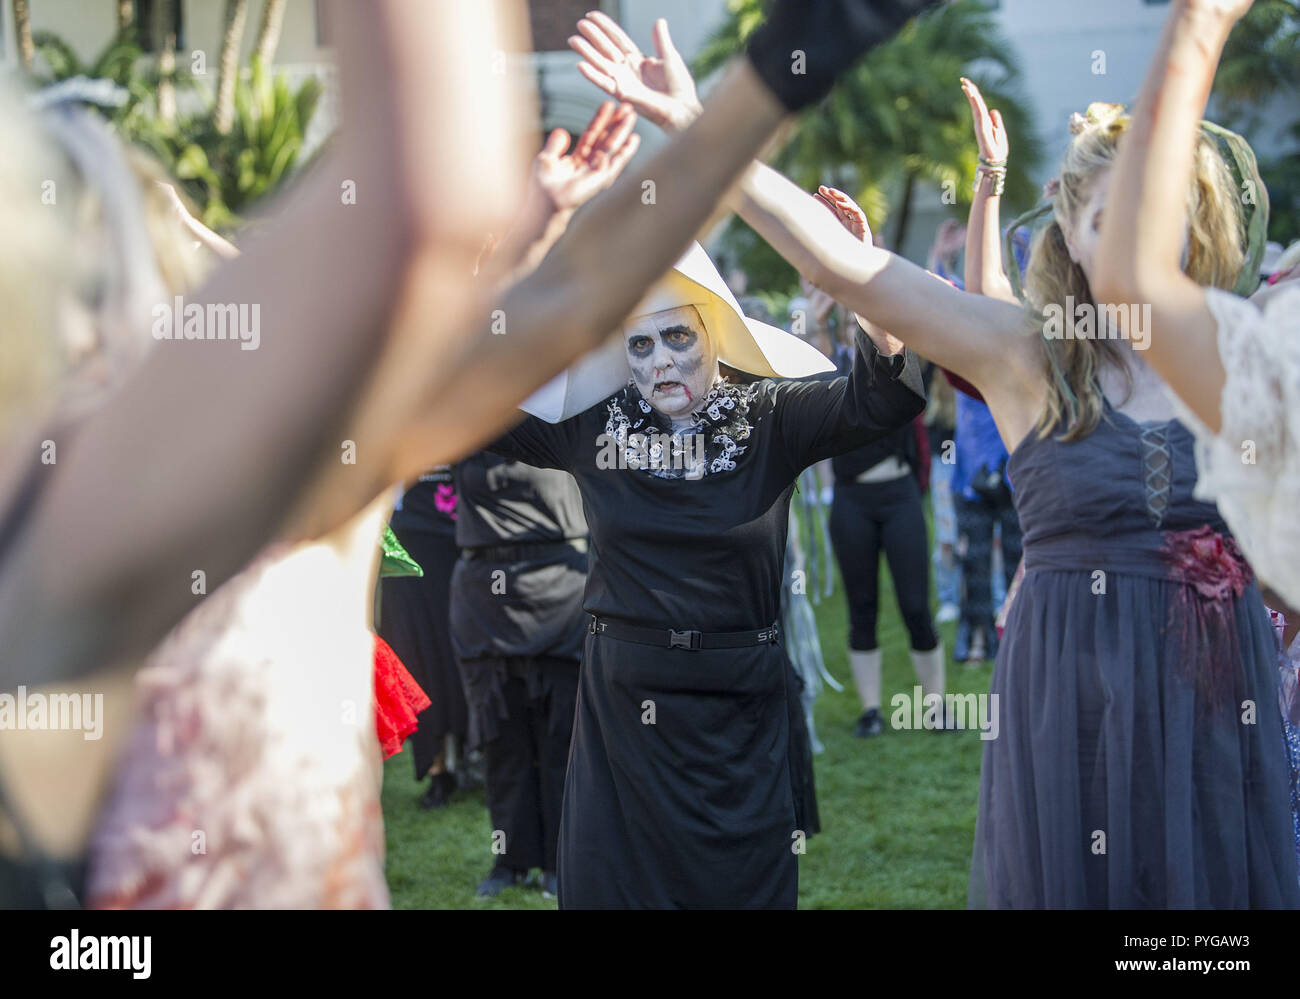 Santa Barbara, California, USA. 27th Oct, 2018. Zombie dancers young and old perform to Michael Jackson's 'Thriller' at the Santa Barbara County Courthouse Sunken Gardens as part of the Thrill the World annual international dance event. Credit: PJ Heller/ZUMA Wire/Alamy Live News Stock Photo